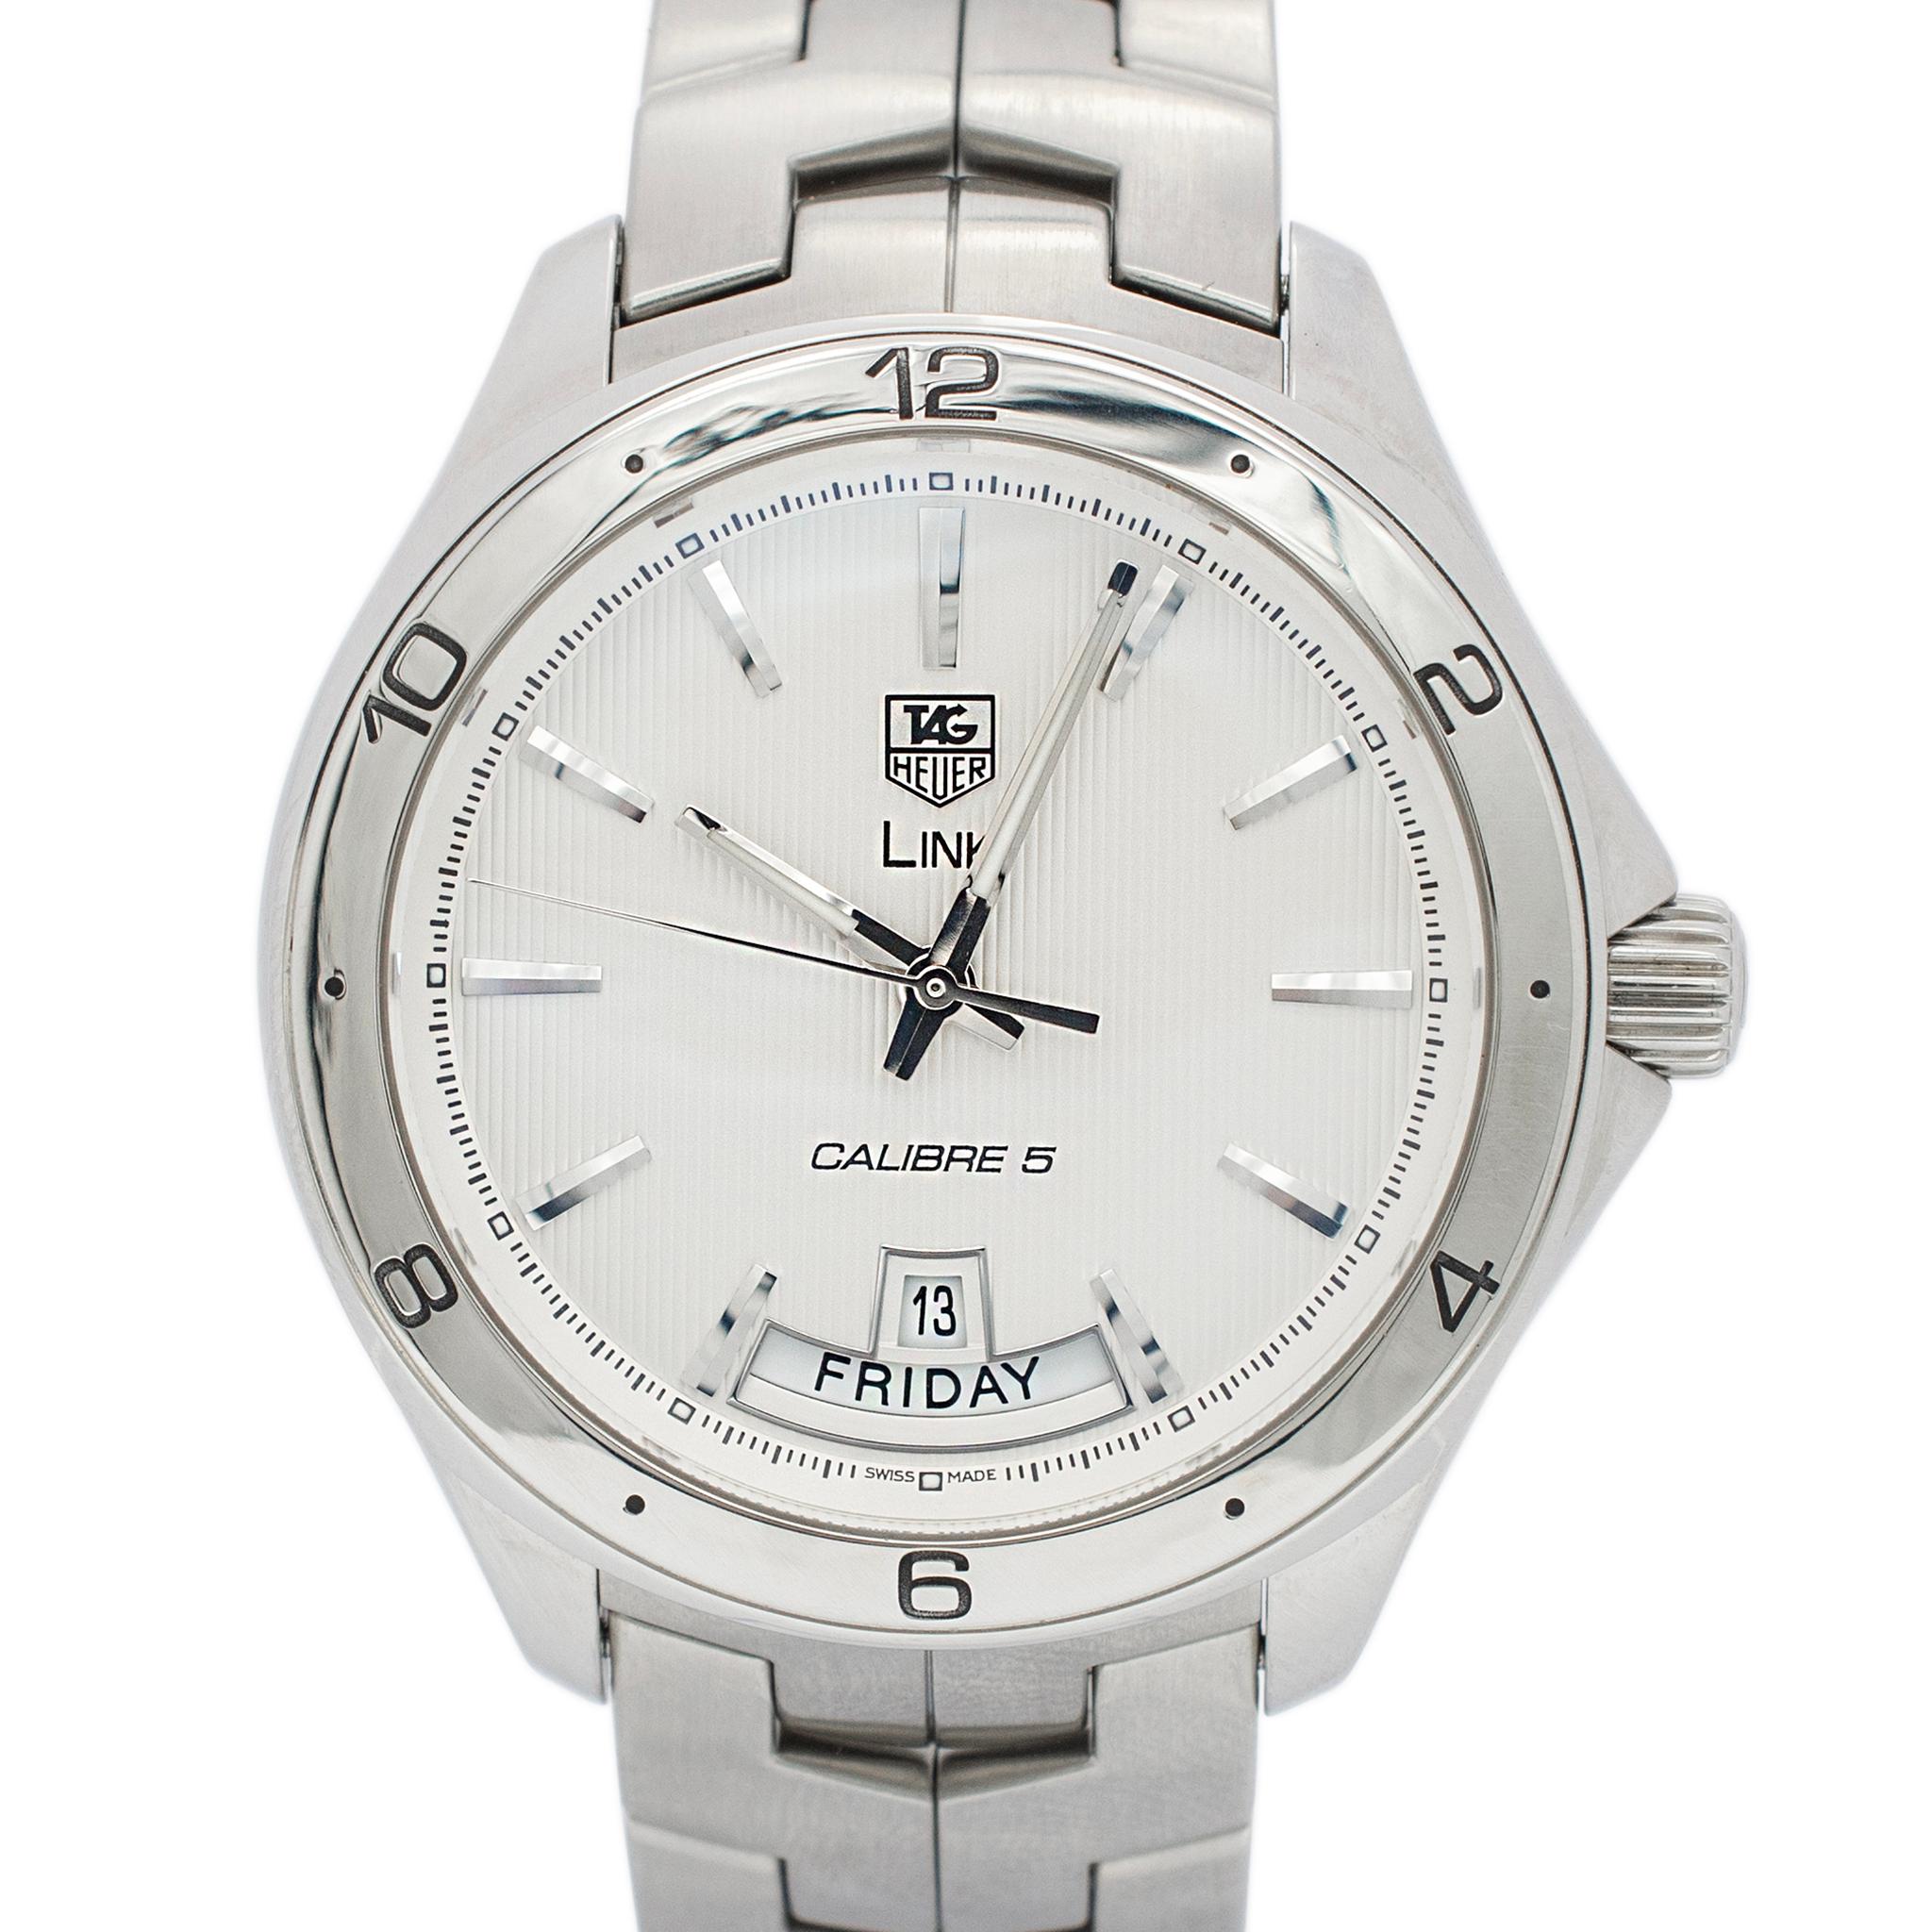 Brand: Tag Heuer

Gender: Mens

Metal Type: Stainless Steel

Band Length: 6.5 inches

Band Width: 22.30mm

Diameter: 42.00 mm

Weight: 152.88 grams

Mens stainless steel TAG HEUER Swiss made watch. Bracelet consisted of 13 Links.
The 